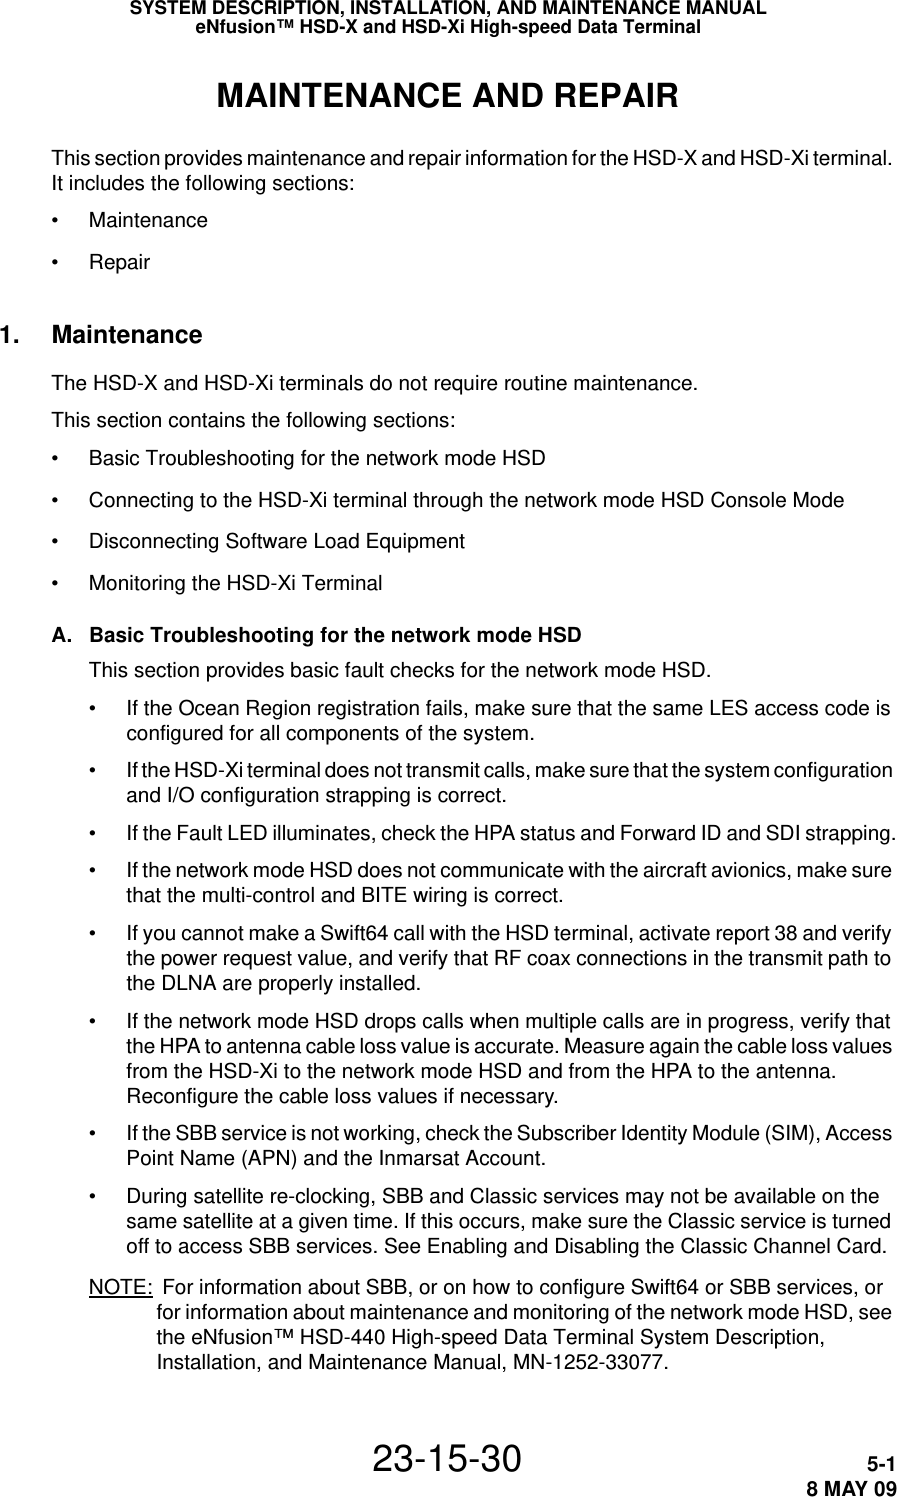 SYSTEM DESCRIPTION, INSTALLATION, AND MAINTENANCE MANUALeNfusion™ HSD-X and HSD-Xi High-speed Data Terminal23-15-30 5-18 MAY 09MAINTENANCE AND REPAIRThis section provides maintenance and repair information for the HSD-X and HSD-Xi terminal. It includes the following sections:•Maintenance•Repair1. MaintenanceThe HSD-X and HSD-Xi terminals do not require routine maintenance.This section contains the following sections:•Basic Troubleshooting for the network mode HSD•Connecting to the HSD-Xi terminal through the network mode HSD Console Mode•Disconnecting Software Load Equipment•Monitoring the HSD-Xi TerminalA. Basic Troubleshooting for the network mode HSD This section provides basic fault checks for the network mode HSD.• If the Ocean Region registration fails, make sure that the same LES access code is configured for all components of the system.• If the HSD-Xi terminal does not transmit calls, make sure that the system configuration and I/O configuration strapping is correct.• If the Fault LED illuminates, check the HPA status and Forward ID and SDI strapping.• If the network mode HSD does not communicate with the aircraft avionics, make sure that the multi-control and BITE wiring is correct.• If you cannot make a Swift64 call with the HSD terminal, activate report 38 and verify the power request value, and verify that RF coax connections in the transmit path to the DLNA are properly installed.• If the network mode HSD drops calls when multiple calls are in progress, verify that the HPA to antenna cable loss value is accurate. Measure again the cable loss values from the HSD-Xi to the network mode HSD and from the HPA to the antenna. Reconfigure the cable loss values if necessary.• If the SBB service is not working, check the Subscriber Identity Module (SIM), Access Point Name (APN) and the Inmarsat Account.• During satellite re-clocking, SBB and Classic services may not be available on the same satellite at a given time. If this occurs, make sure the Classic service is turned off to access SBB services. See Enabling and Disabling the Classic Channel Card.NOTE:  For information about SBB, or on how to configure Swift64 or SBB services, or for information about maintenance and monitoring of the network mode HSD, see the eNfusion™ HSD-440 High-speed Data Terminal System Description, Installation, and Maintenance Manual, MN-1252-33077.